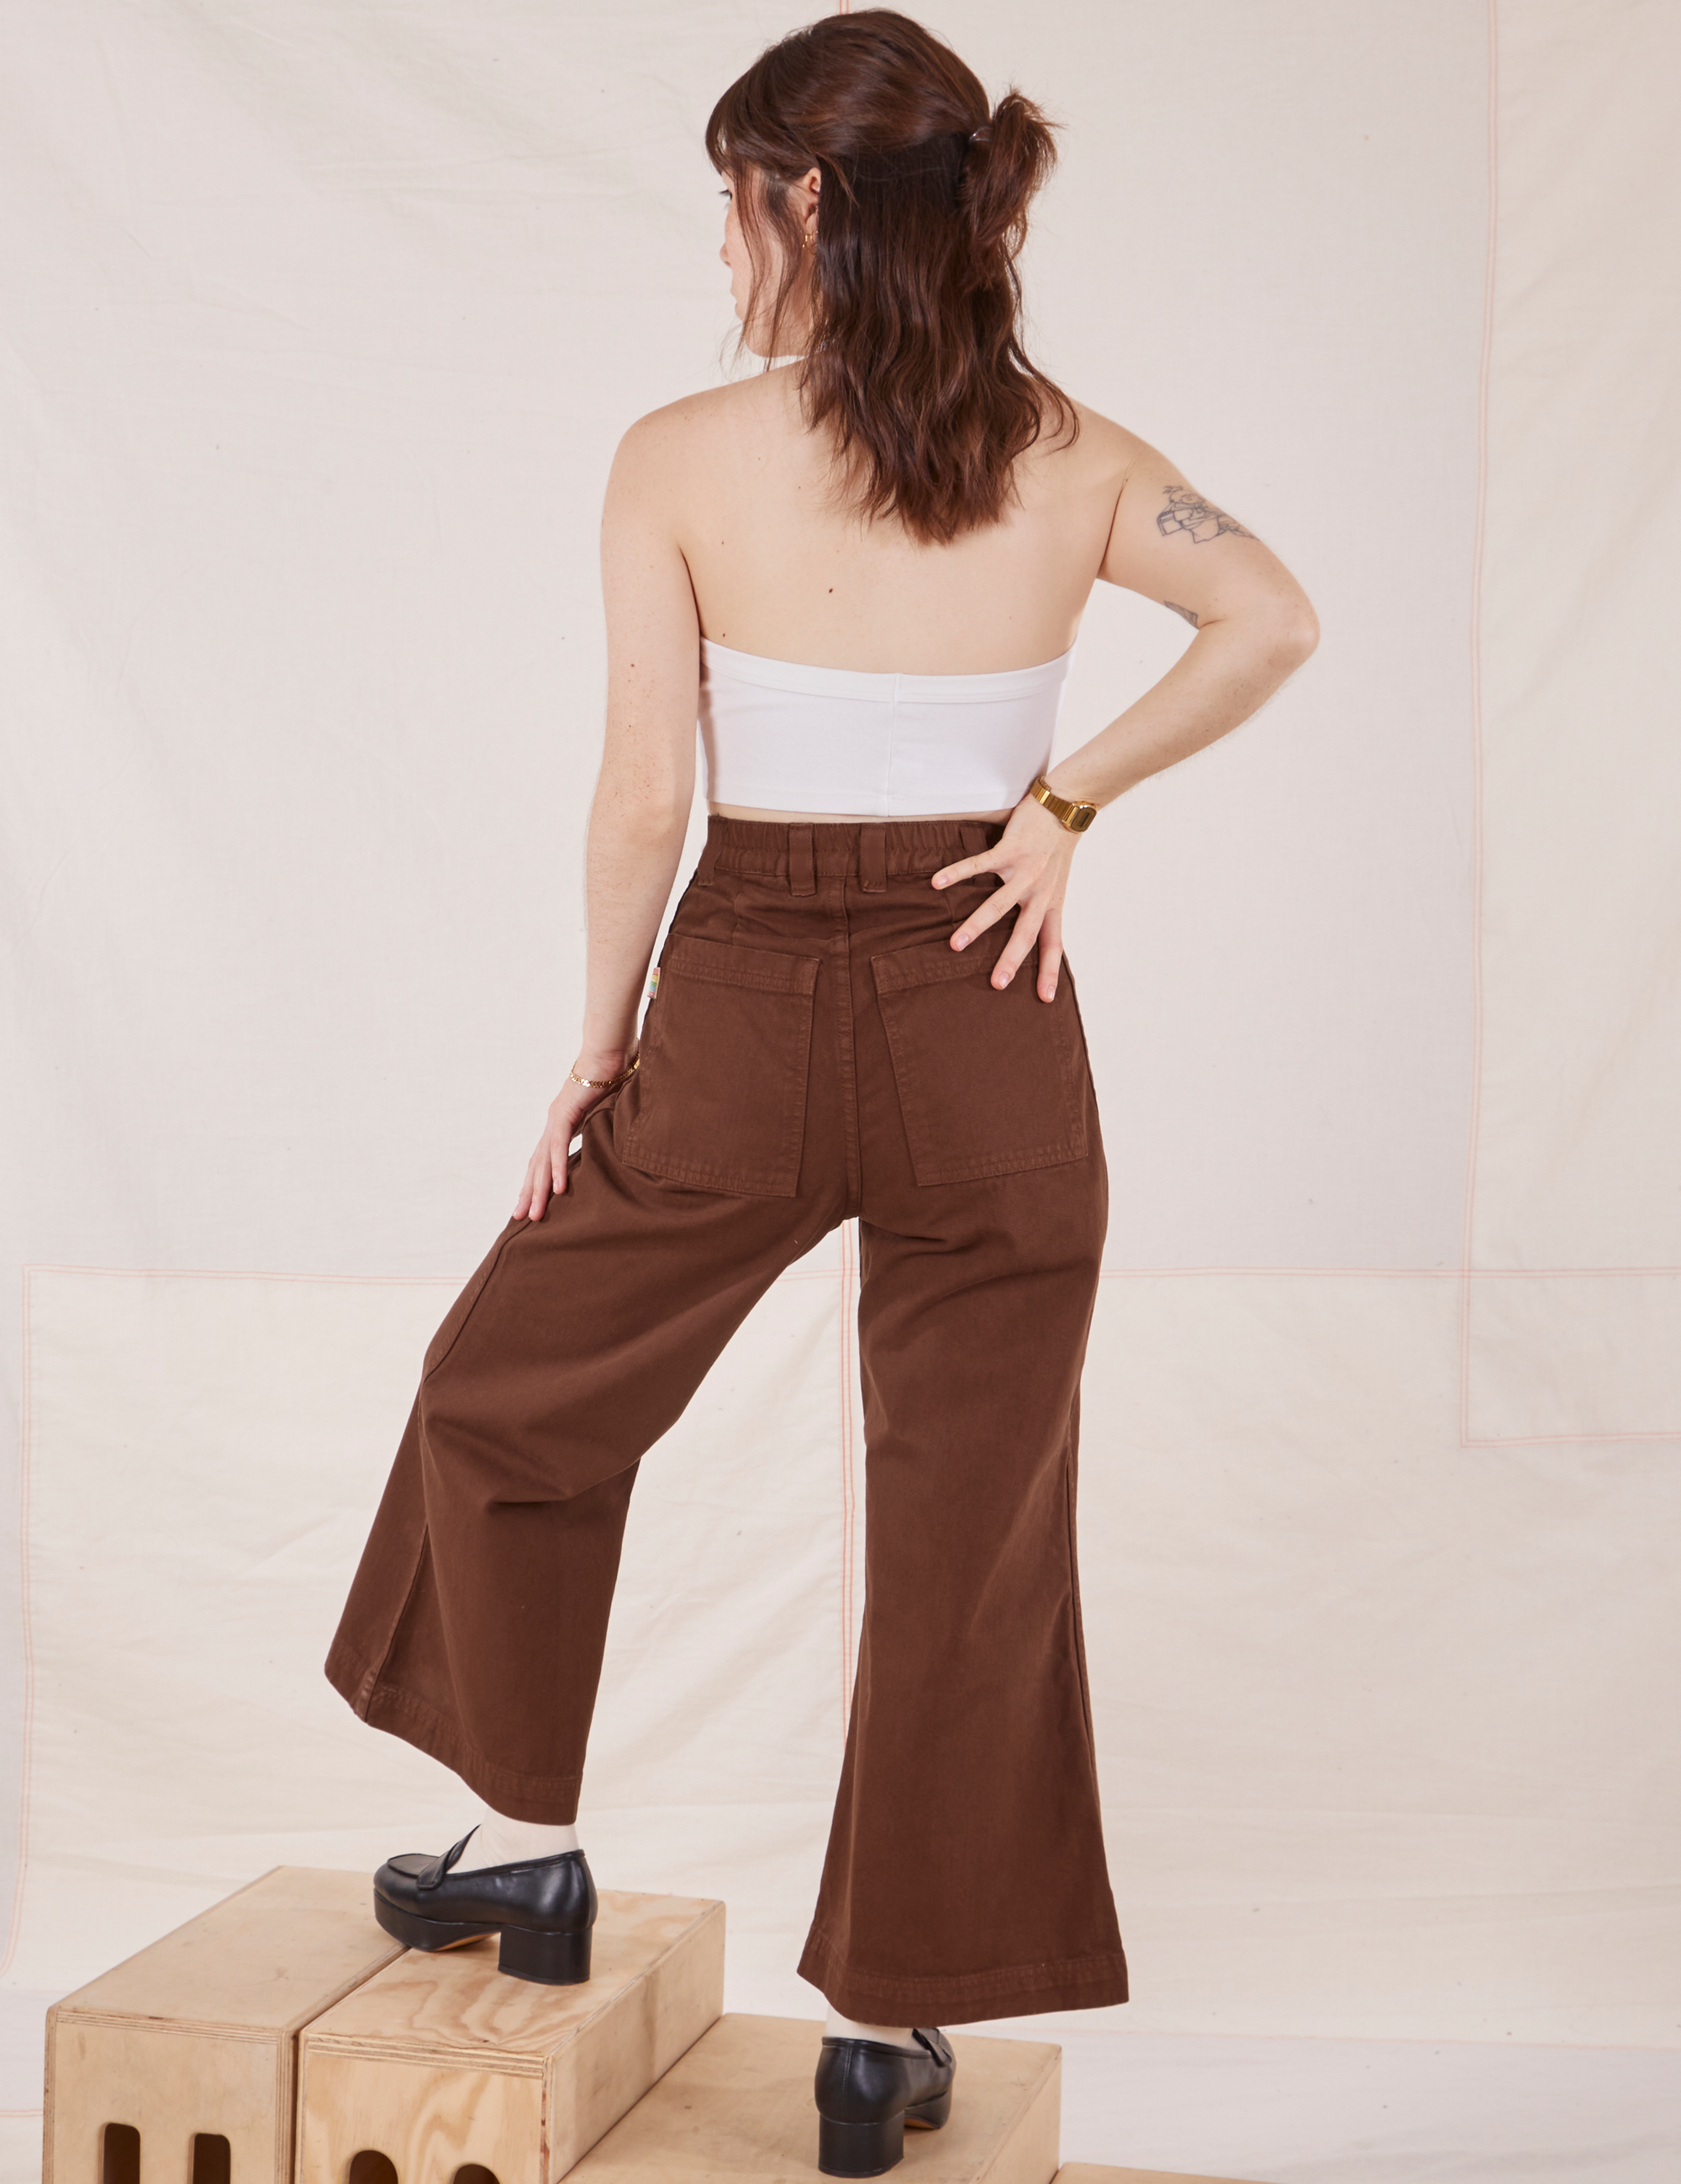 Back view of Petite Bell Bottoms in Fudgesicle Brown and Halter Top in vintage tee off-white